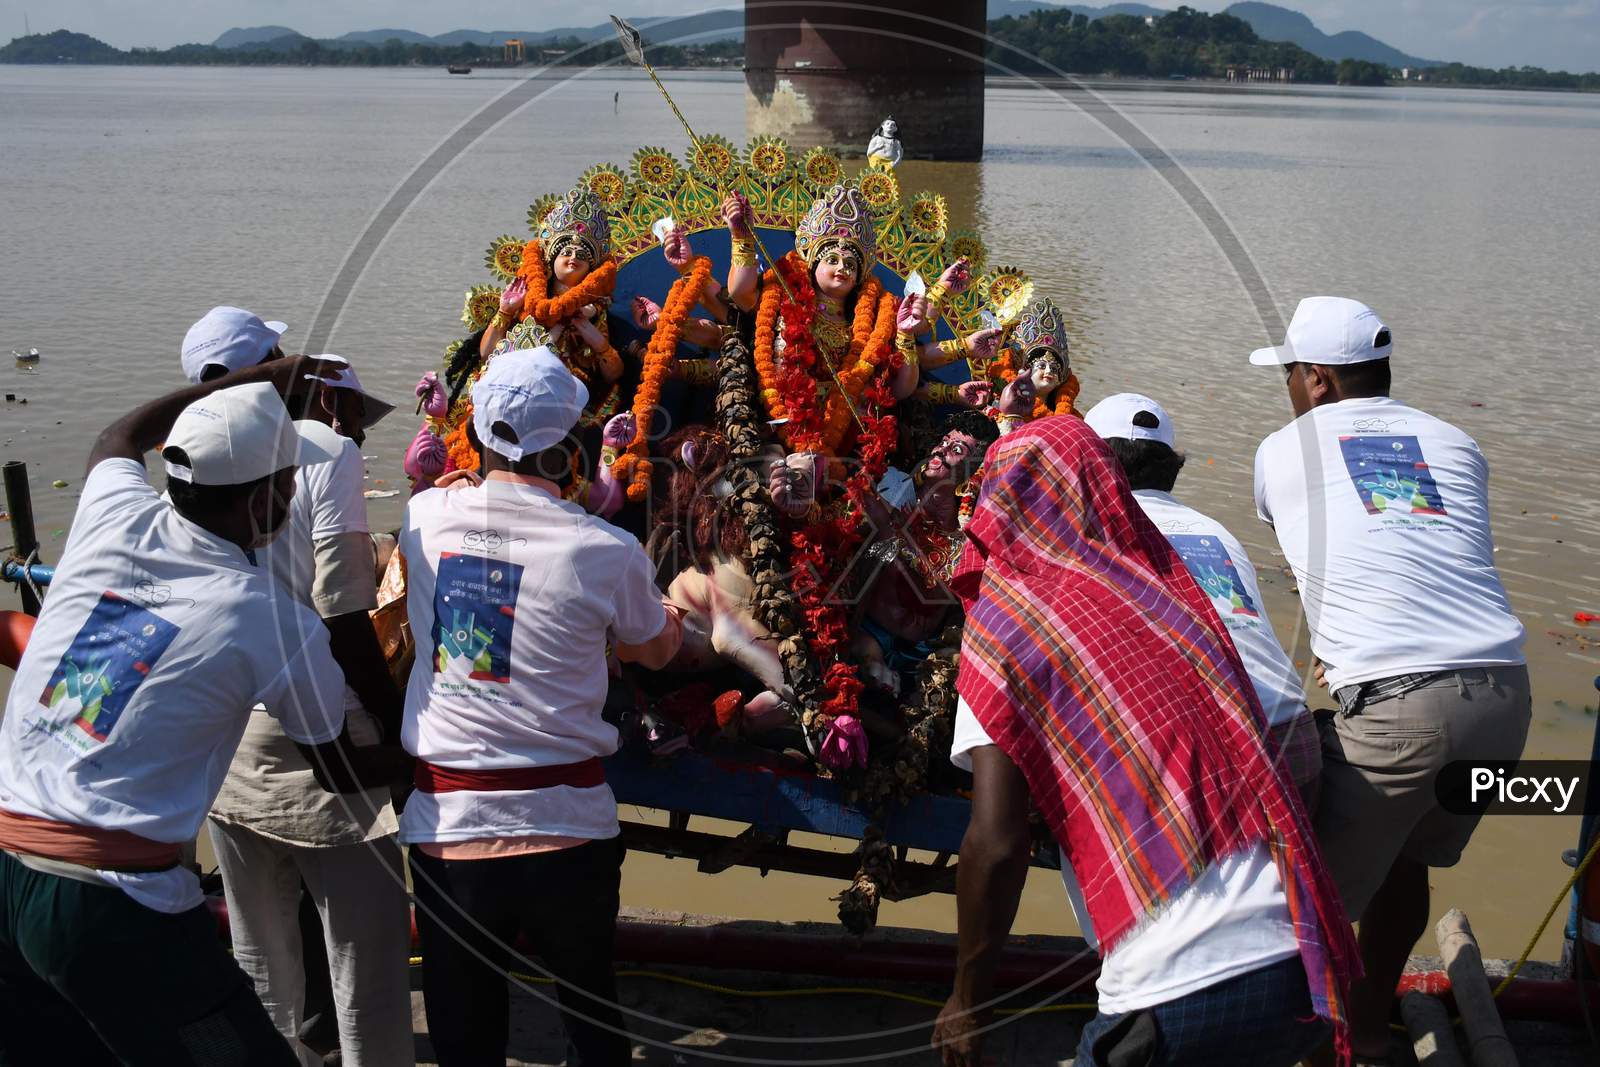 Municipal workers immerse an idol of the Hindu goddess Durga in the waters of the river Brahmaputra on the last day of the Durga Puja festival in Guwahati on Oct 26,2020.